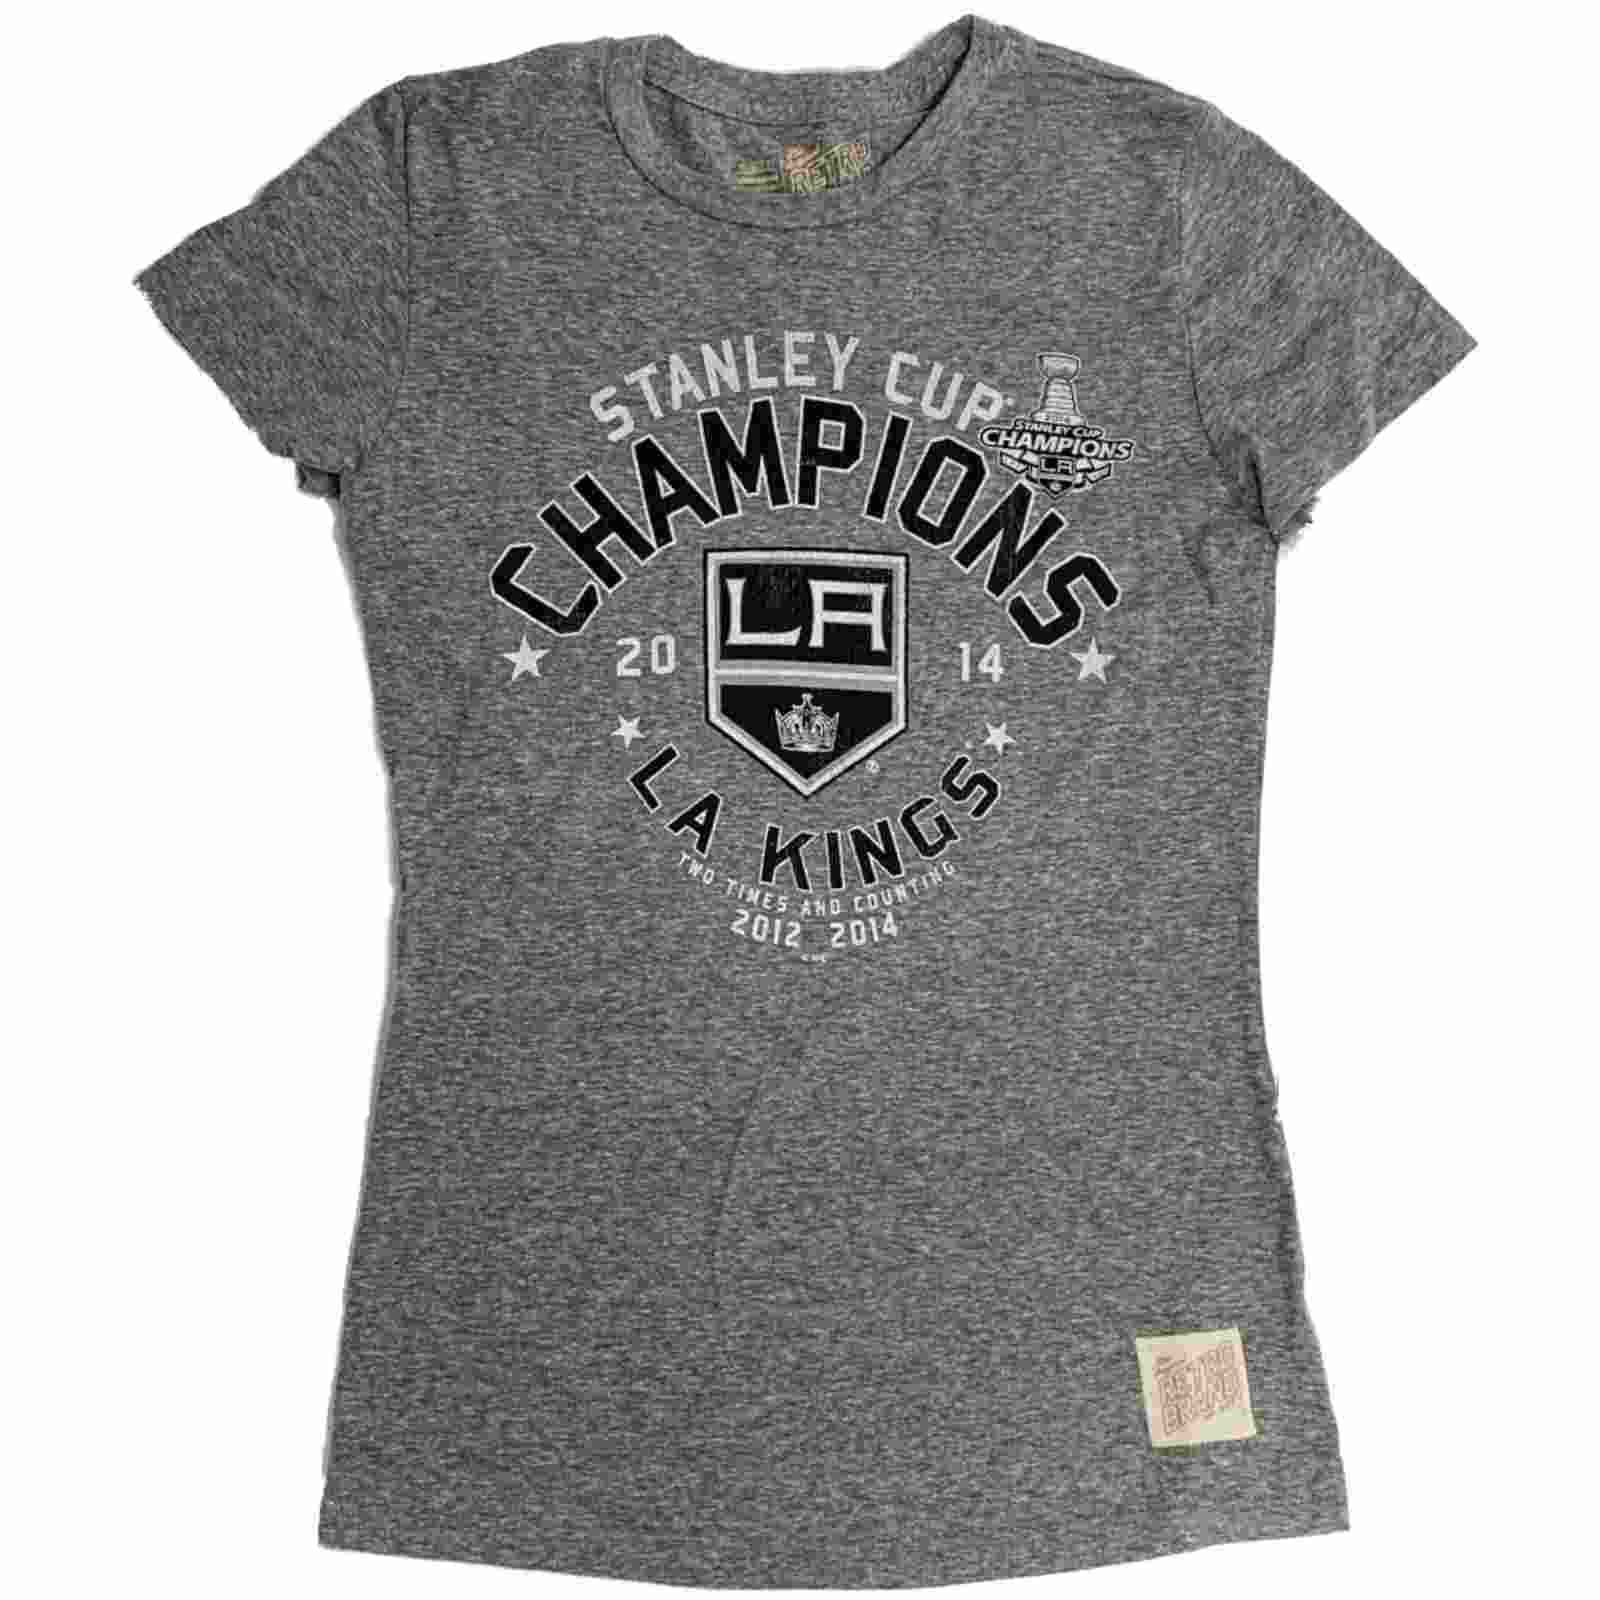 Kings Stanley Cup Championship gear is already being sold in LA 